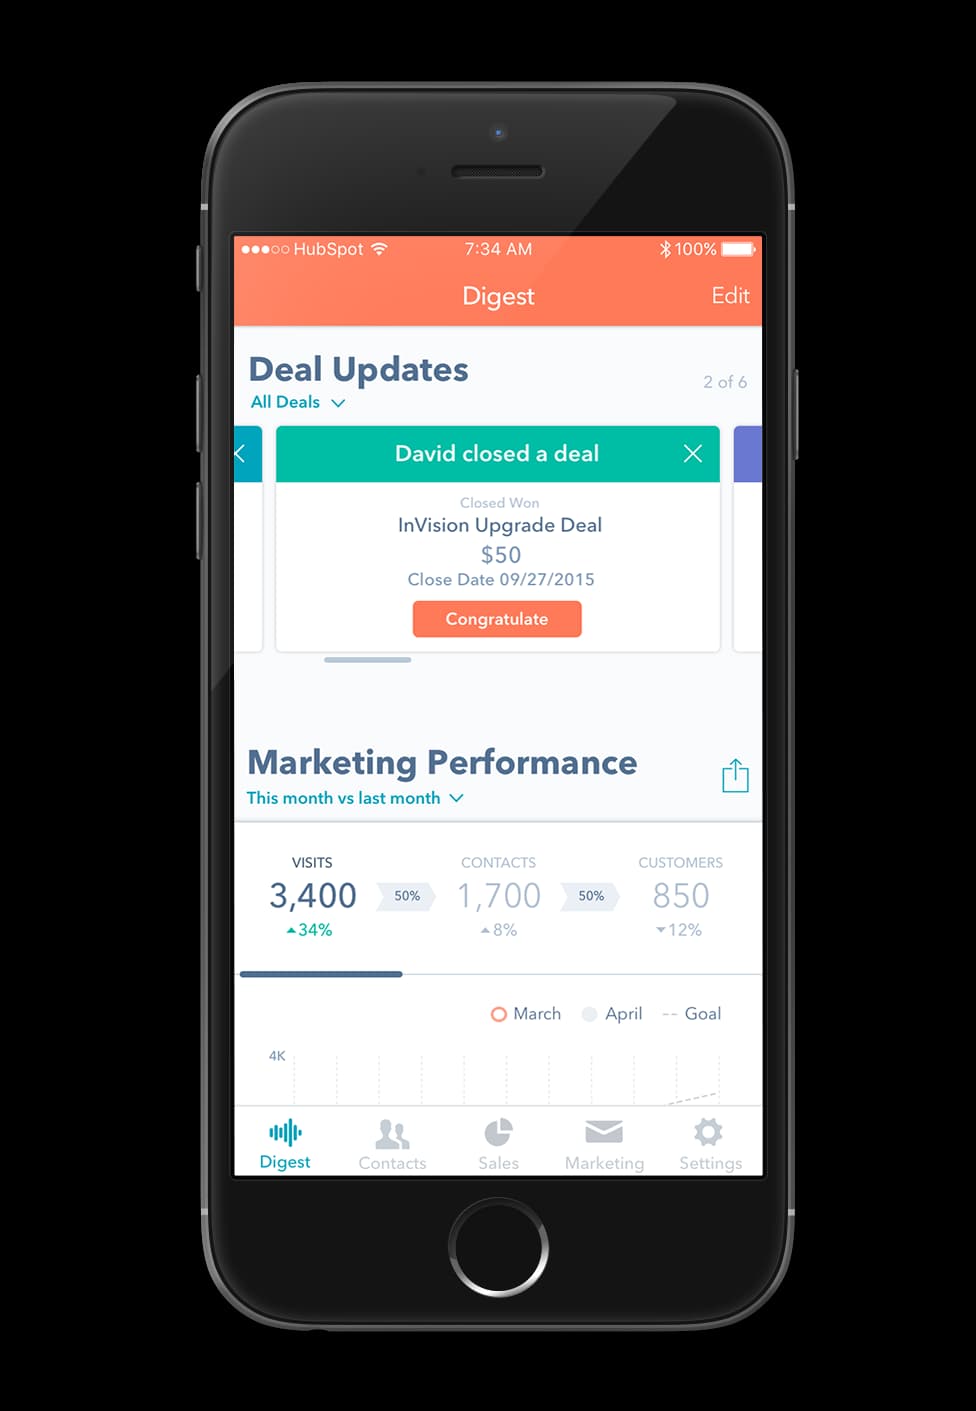 Mobile CRM solution from Insightly.